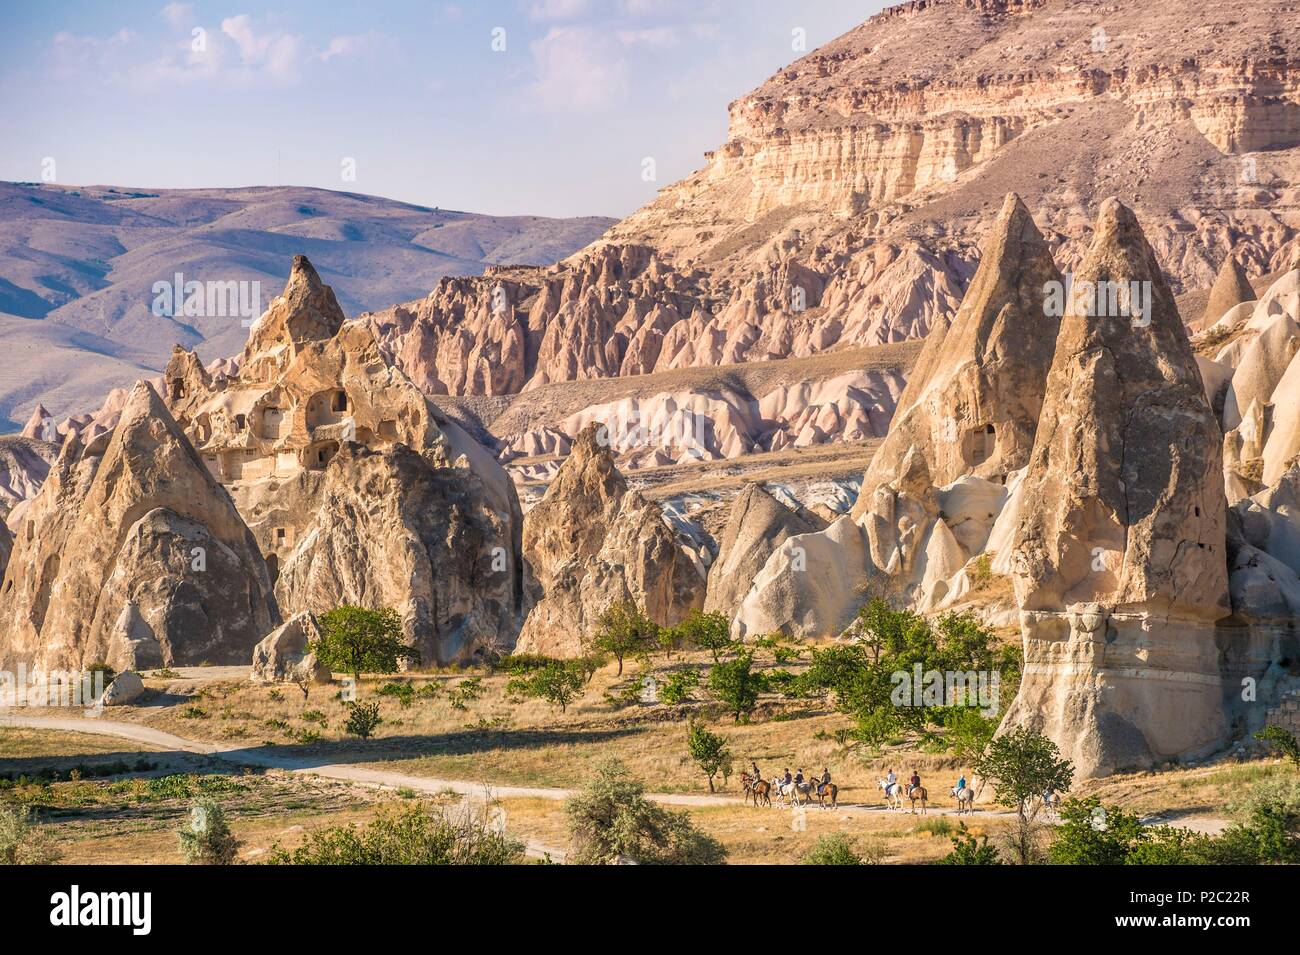 Turkey, Central Anatolia, Nev&#x15f;ehir province, Cappadocia UNESCO World Heritage Site, Kiliçlar, horse riding in the Valley of the Swords, landscape of volcanic tuff hills and vestiges of troglodyte dwellings of the Göreme National Park Stock Photo